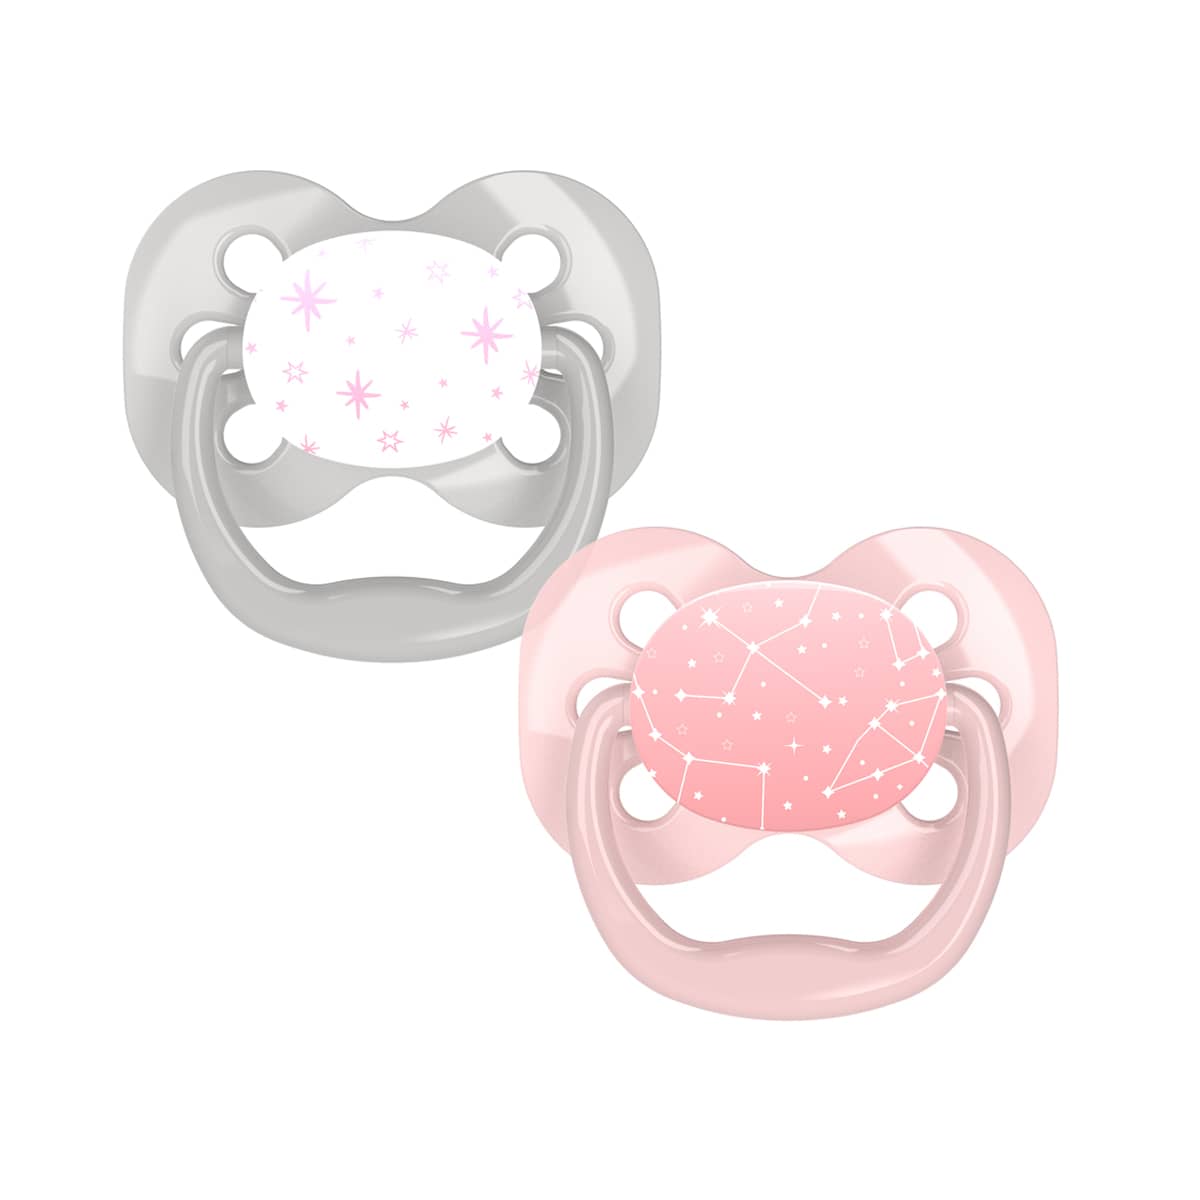 Dr Browns Advantage Pacifiers - Pink Stars